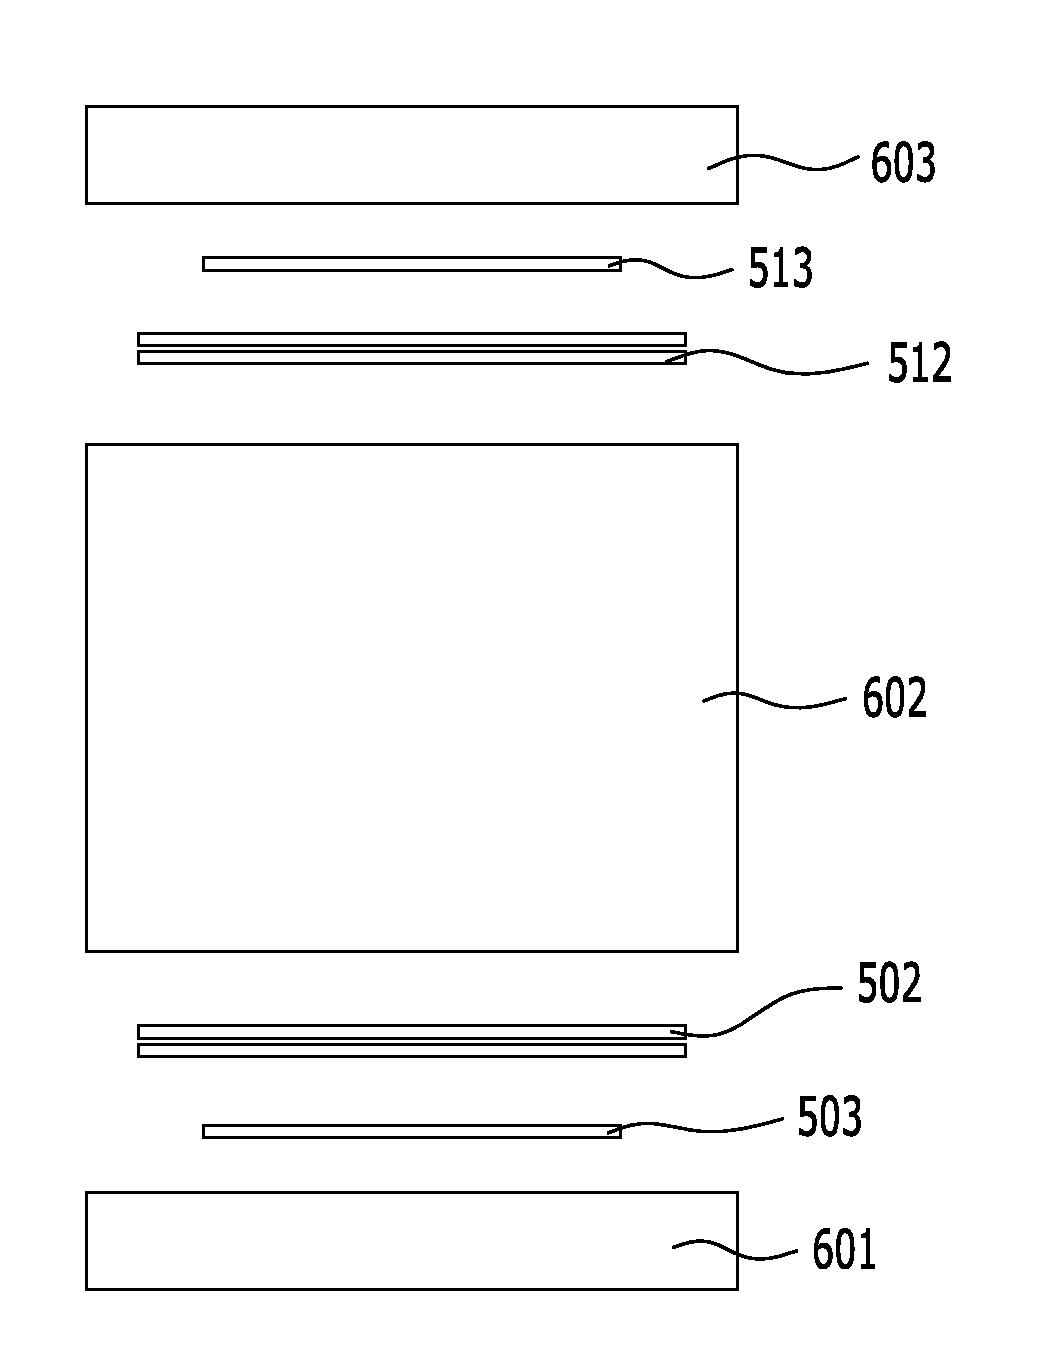 Apparatus for reducing electric field and radiation field in magnetic resonant coupling coils or magnetic induction device for wireless energy transfer